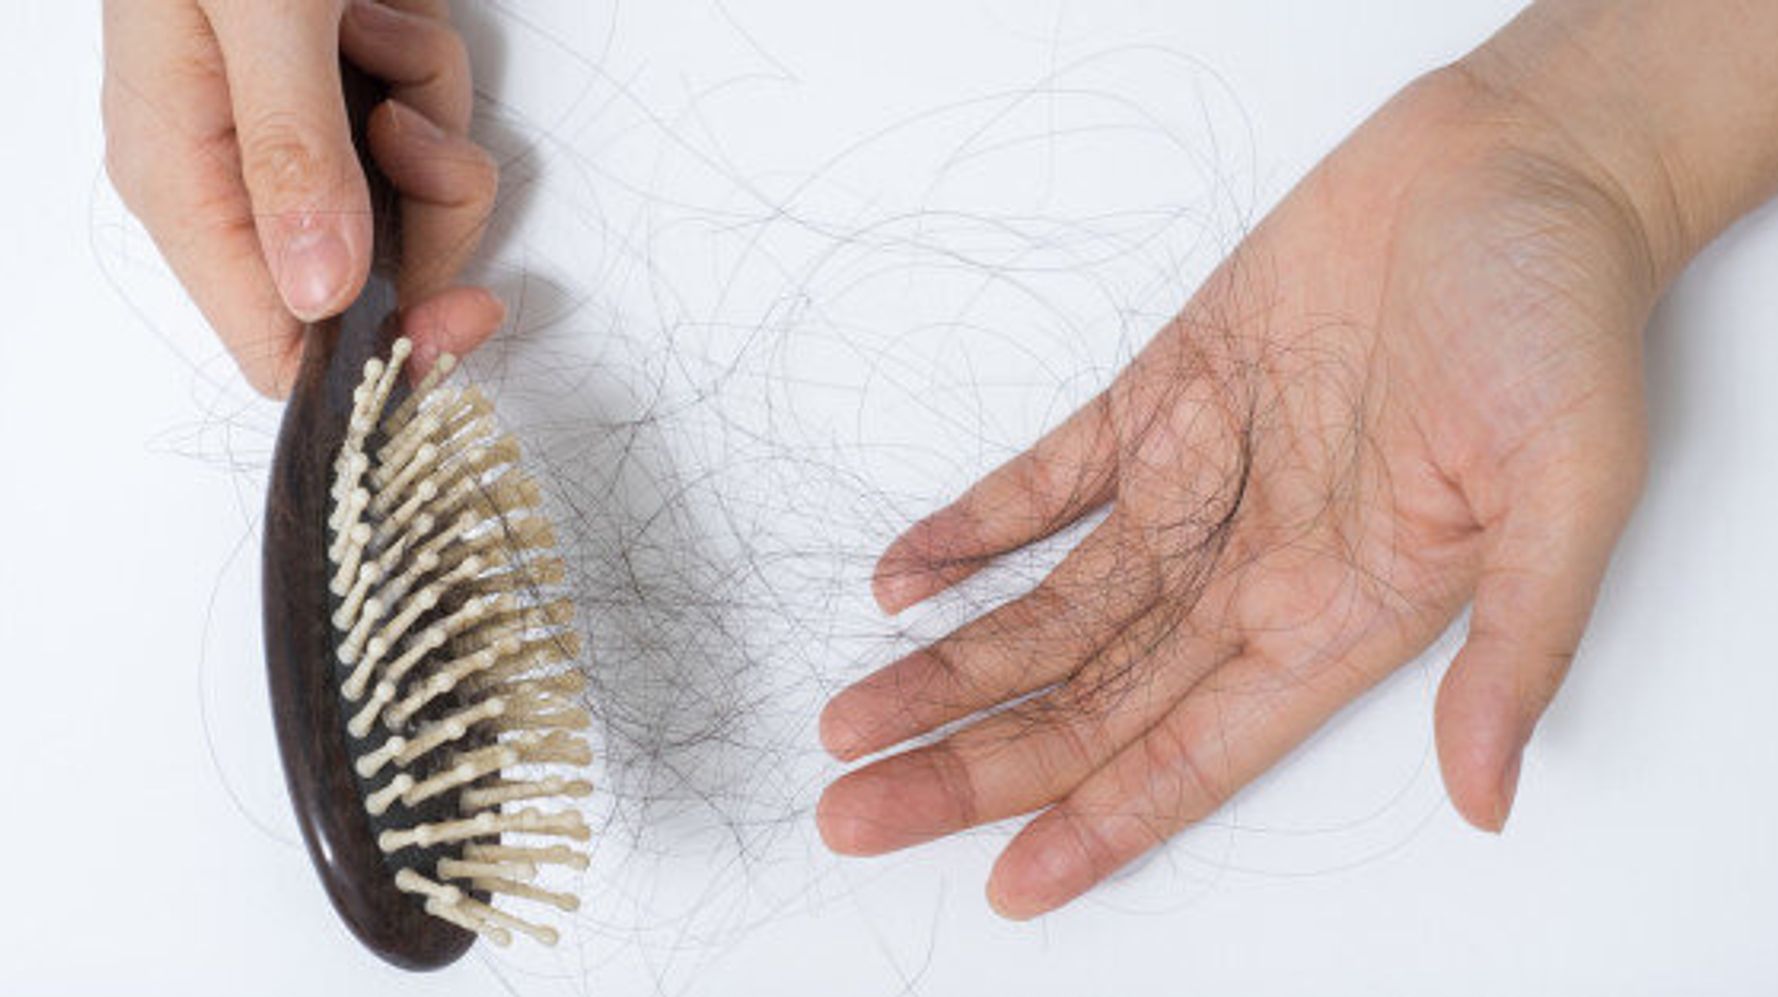 Thinning Hair In Women: Why It Occurs And What Can Be Done | HuffPost Australia News